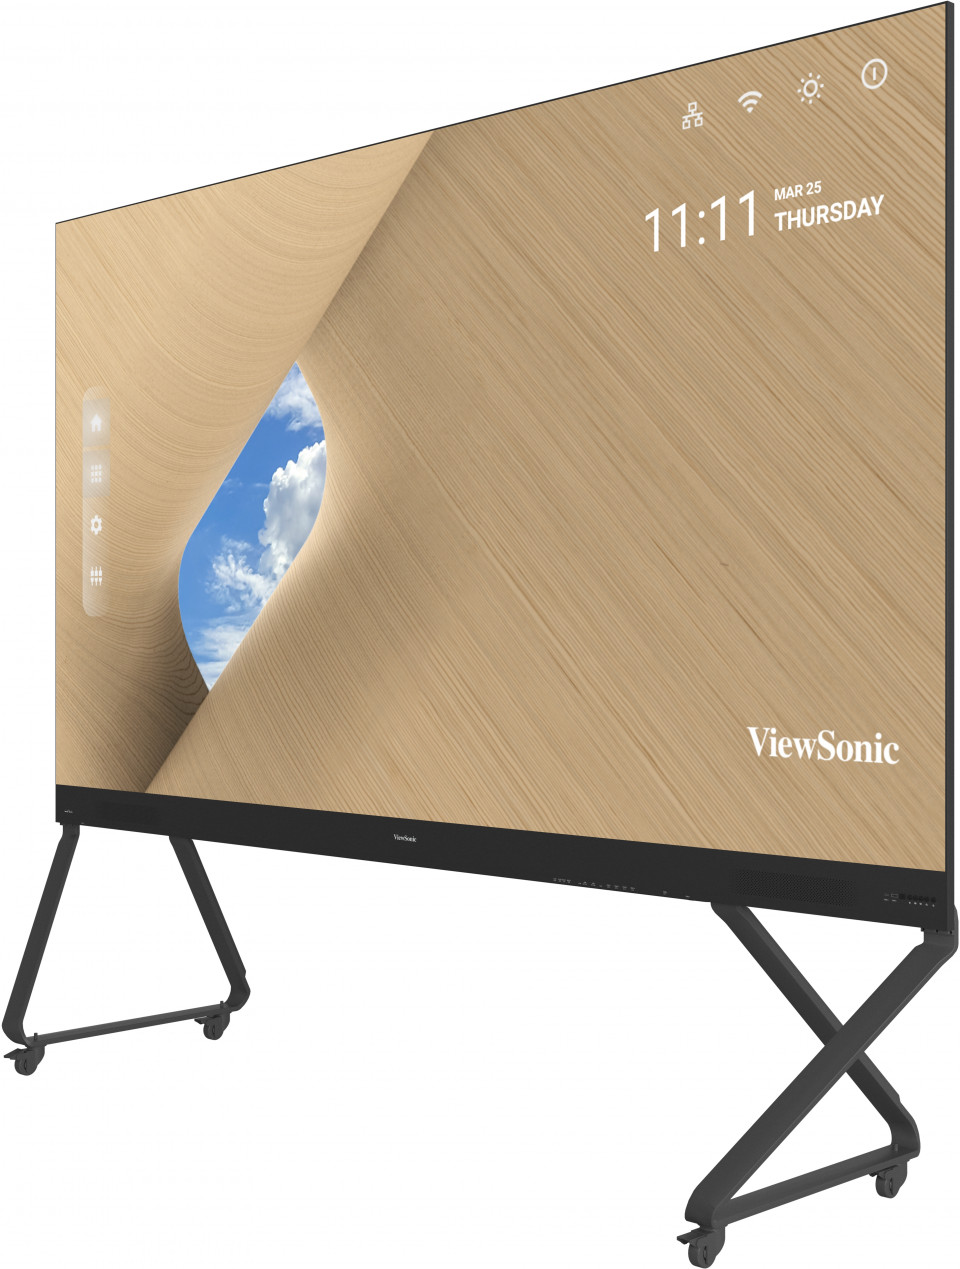 ViewSonic LDP108-121 All-in-One Direct View LED Display - 108 Inch - 1.25mm PP - 500 cd/m² - 1920x1080 Pixel - LED Display